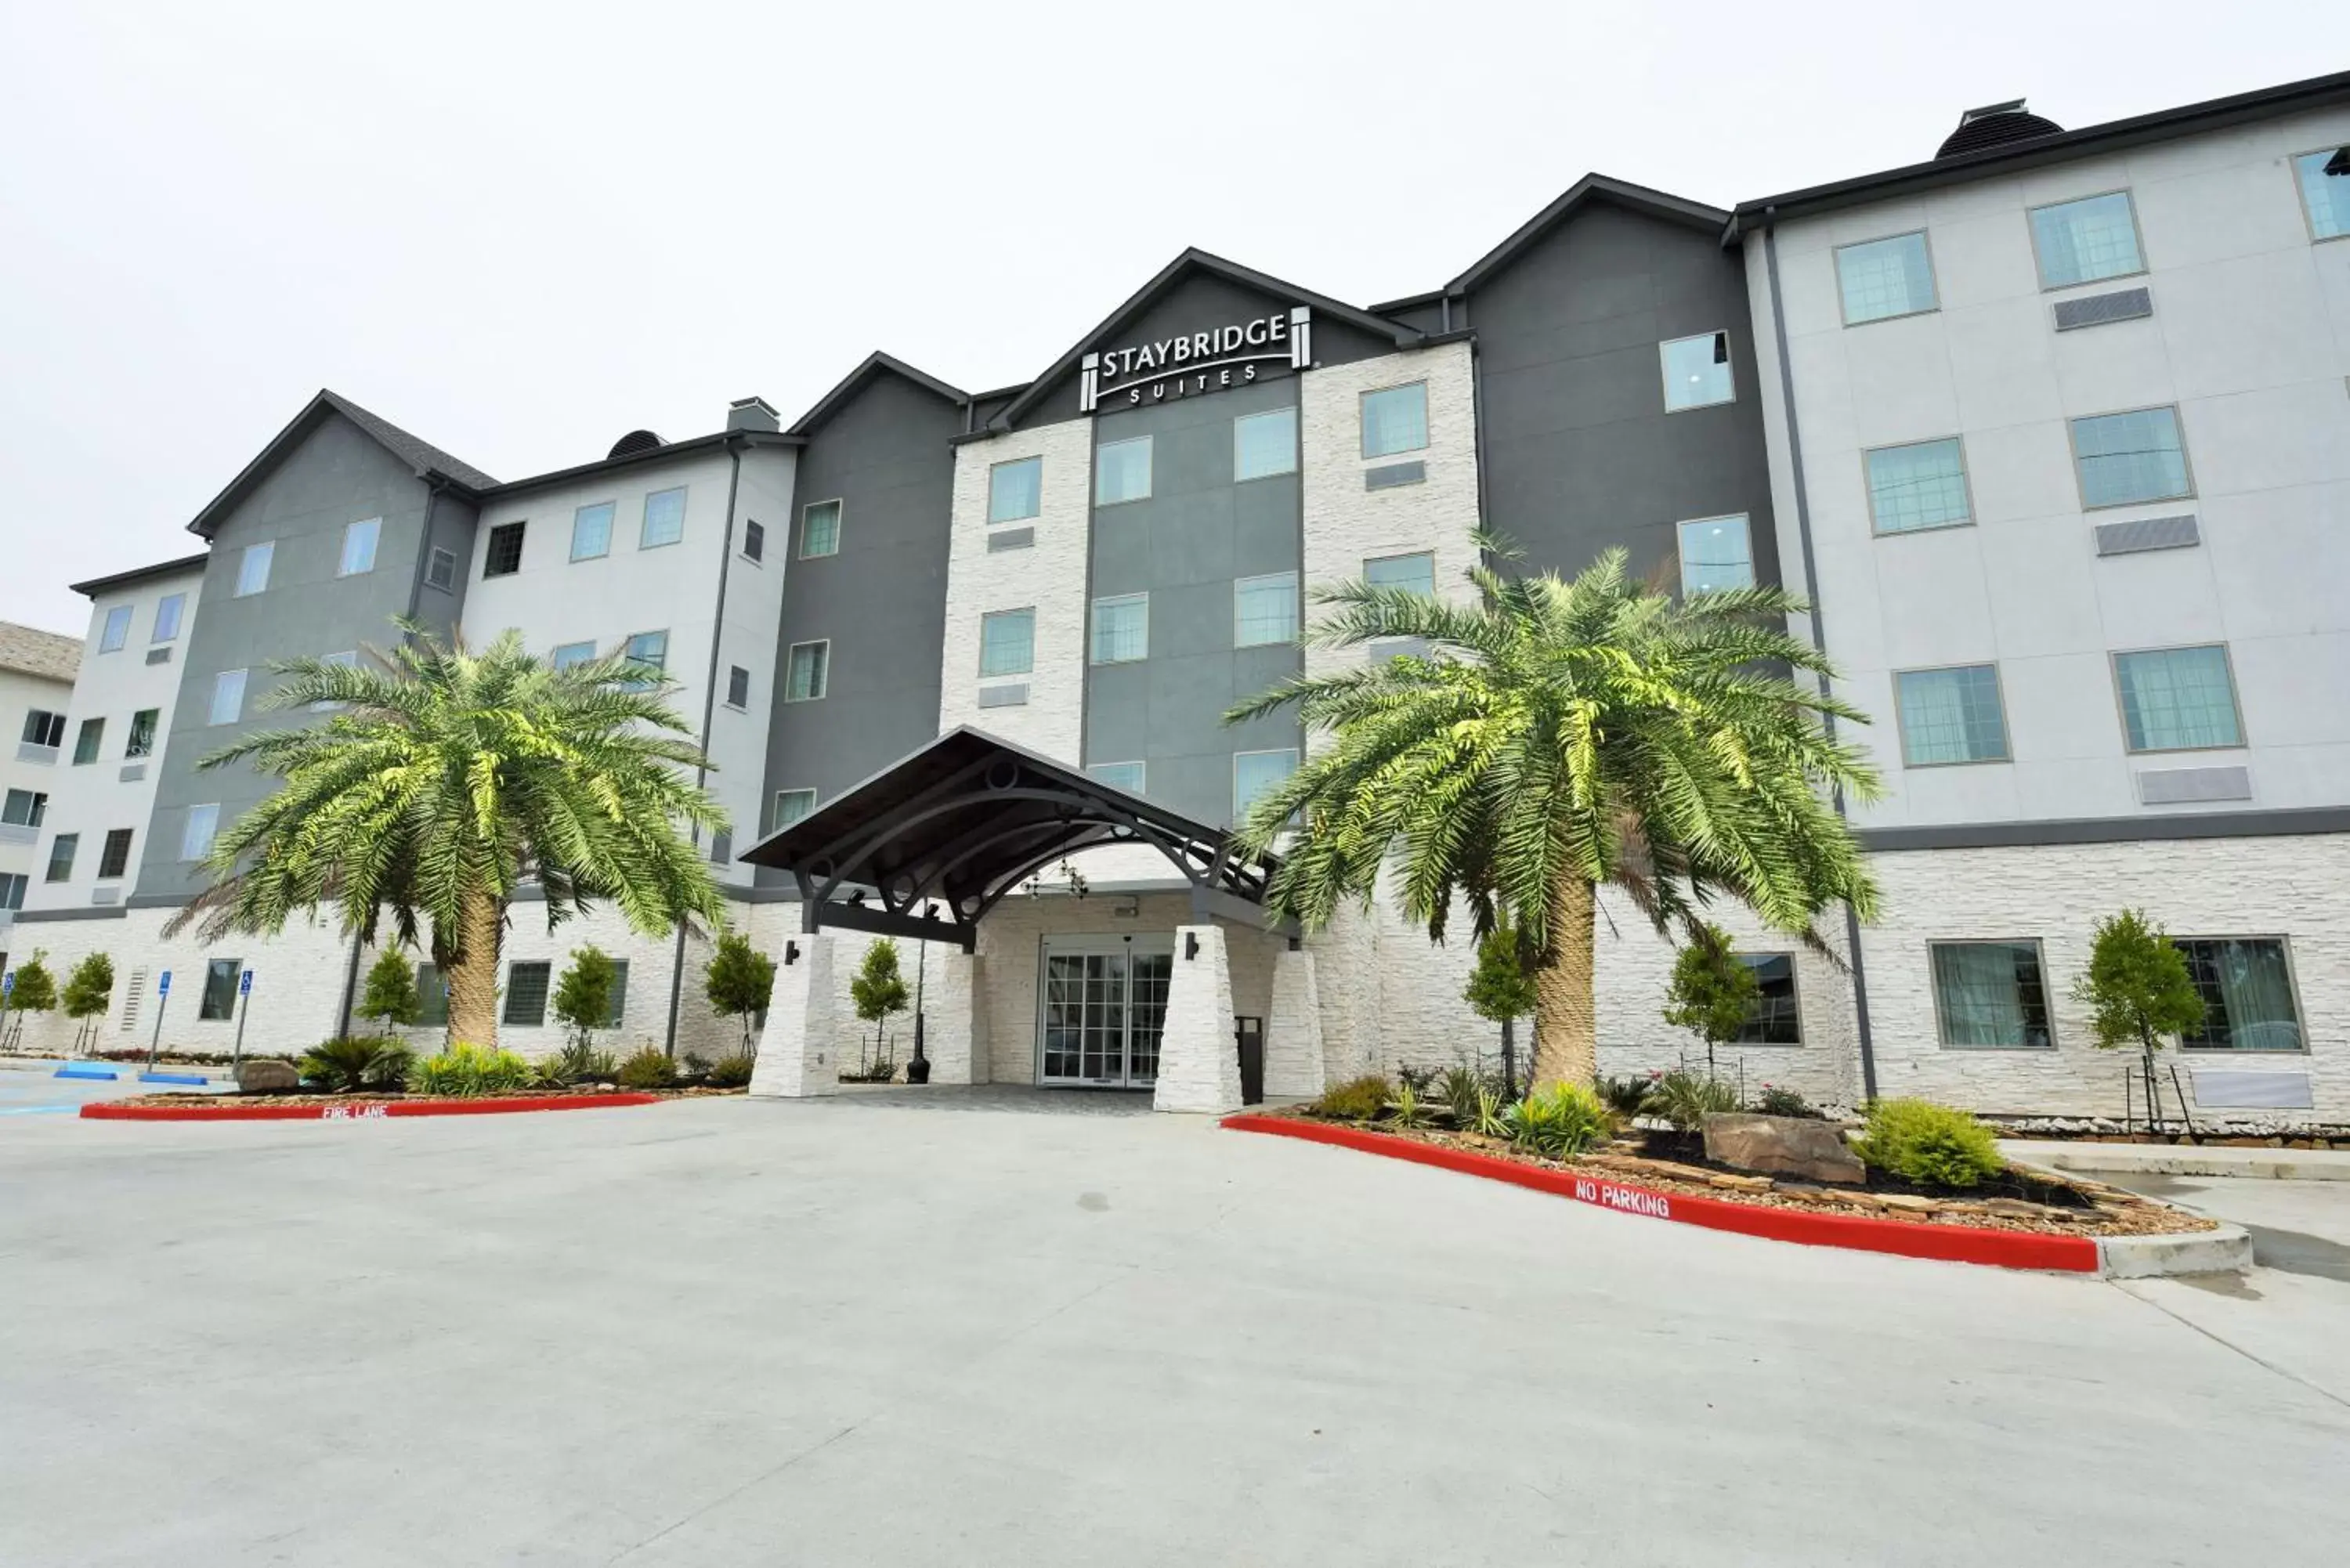 Property building, Facade/Entrance in Staybridge Suites - Lake Charles, an IHG Hotel